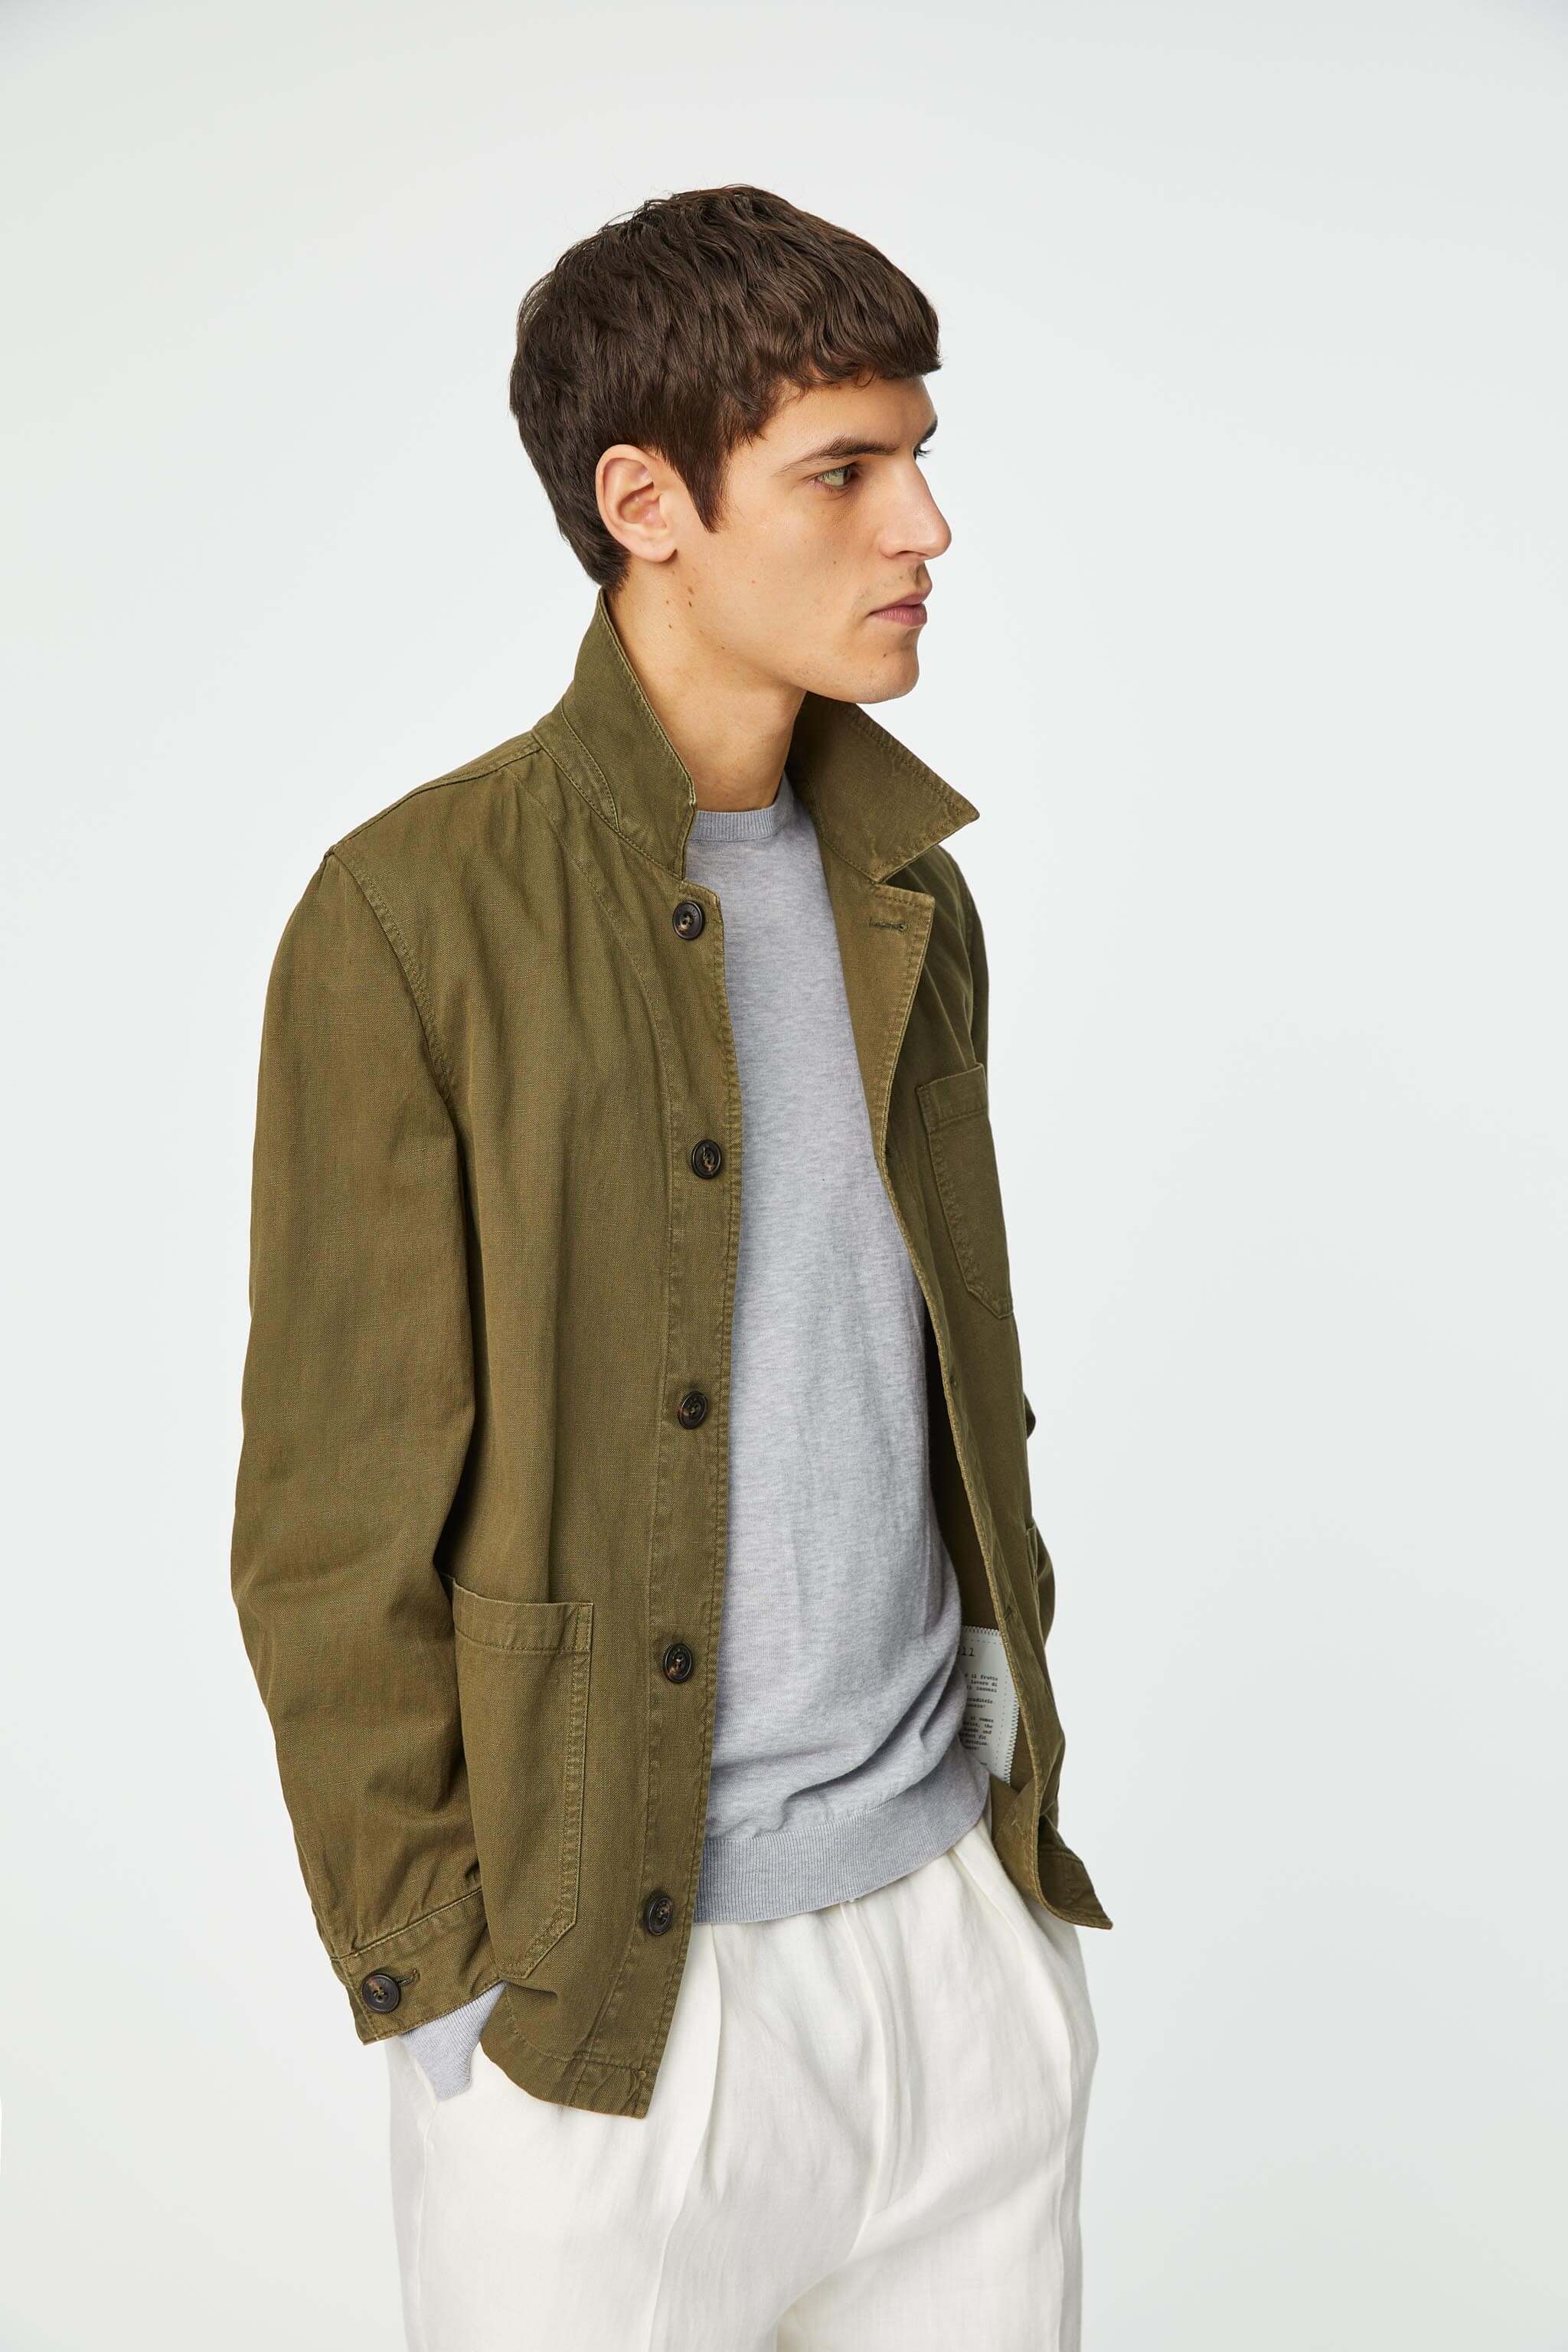 Garment-dyed Overshirt in army green